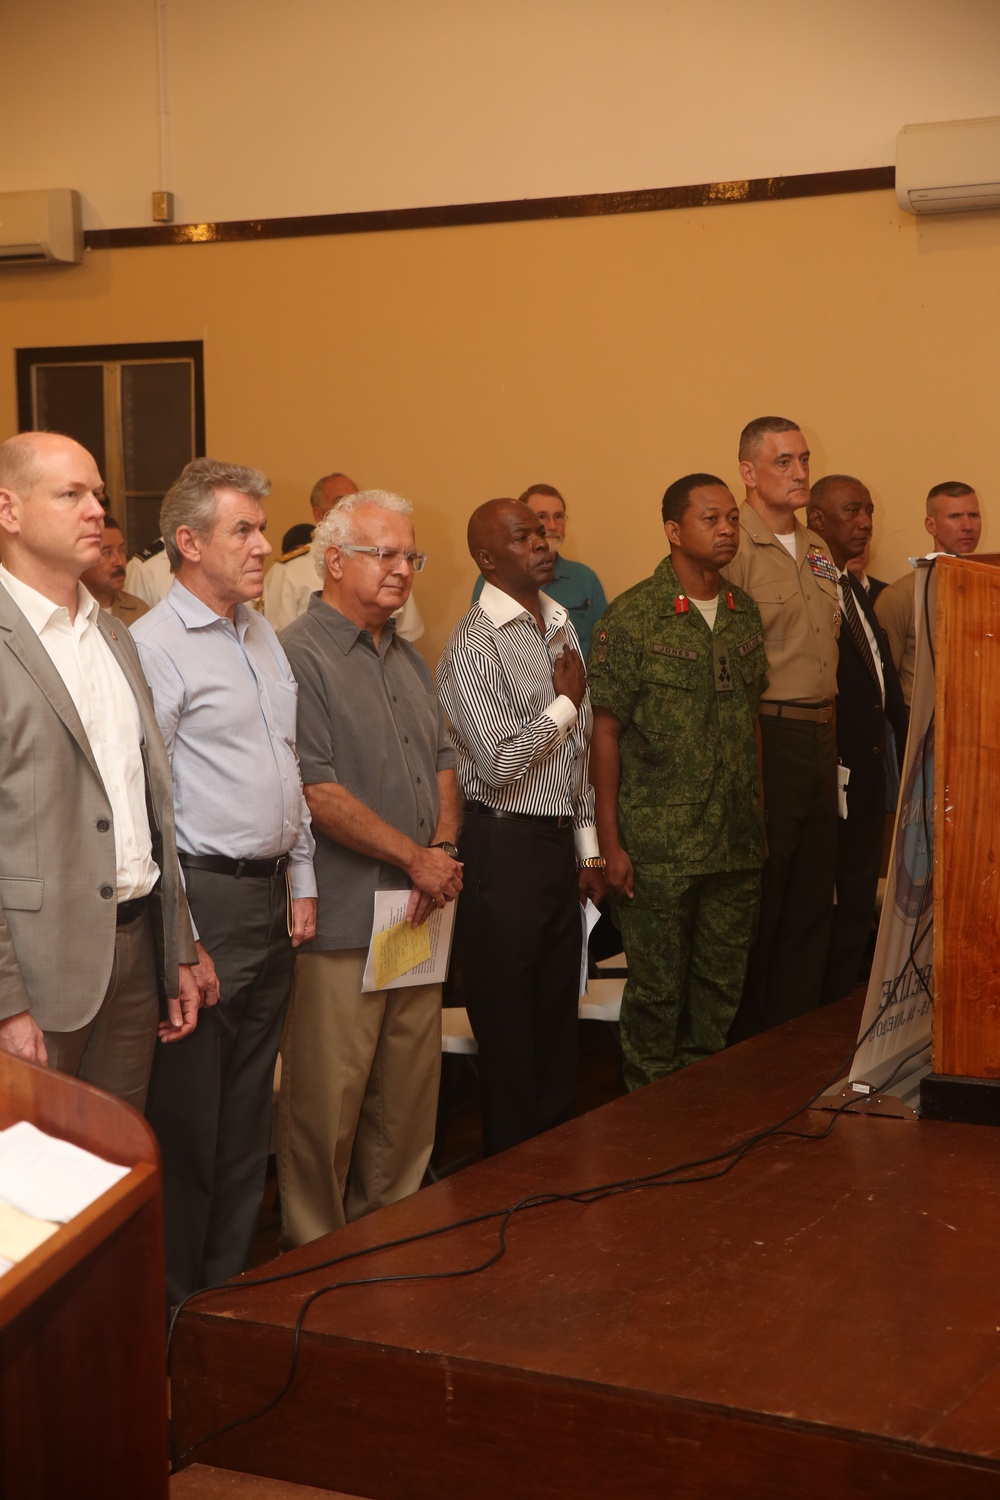 Phase II of exercise Tradewinds 2015 comes to a close